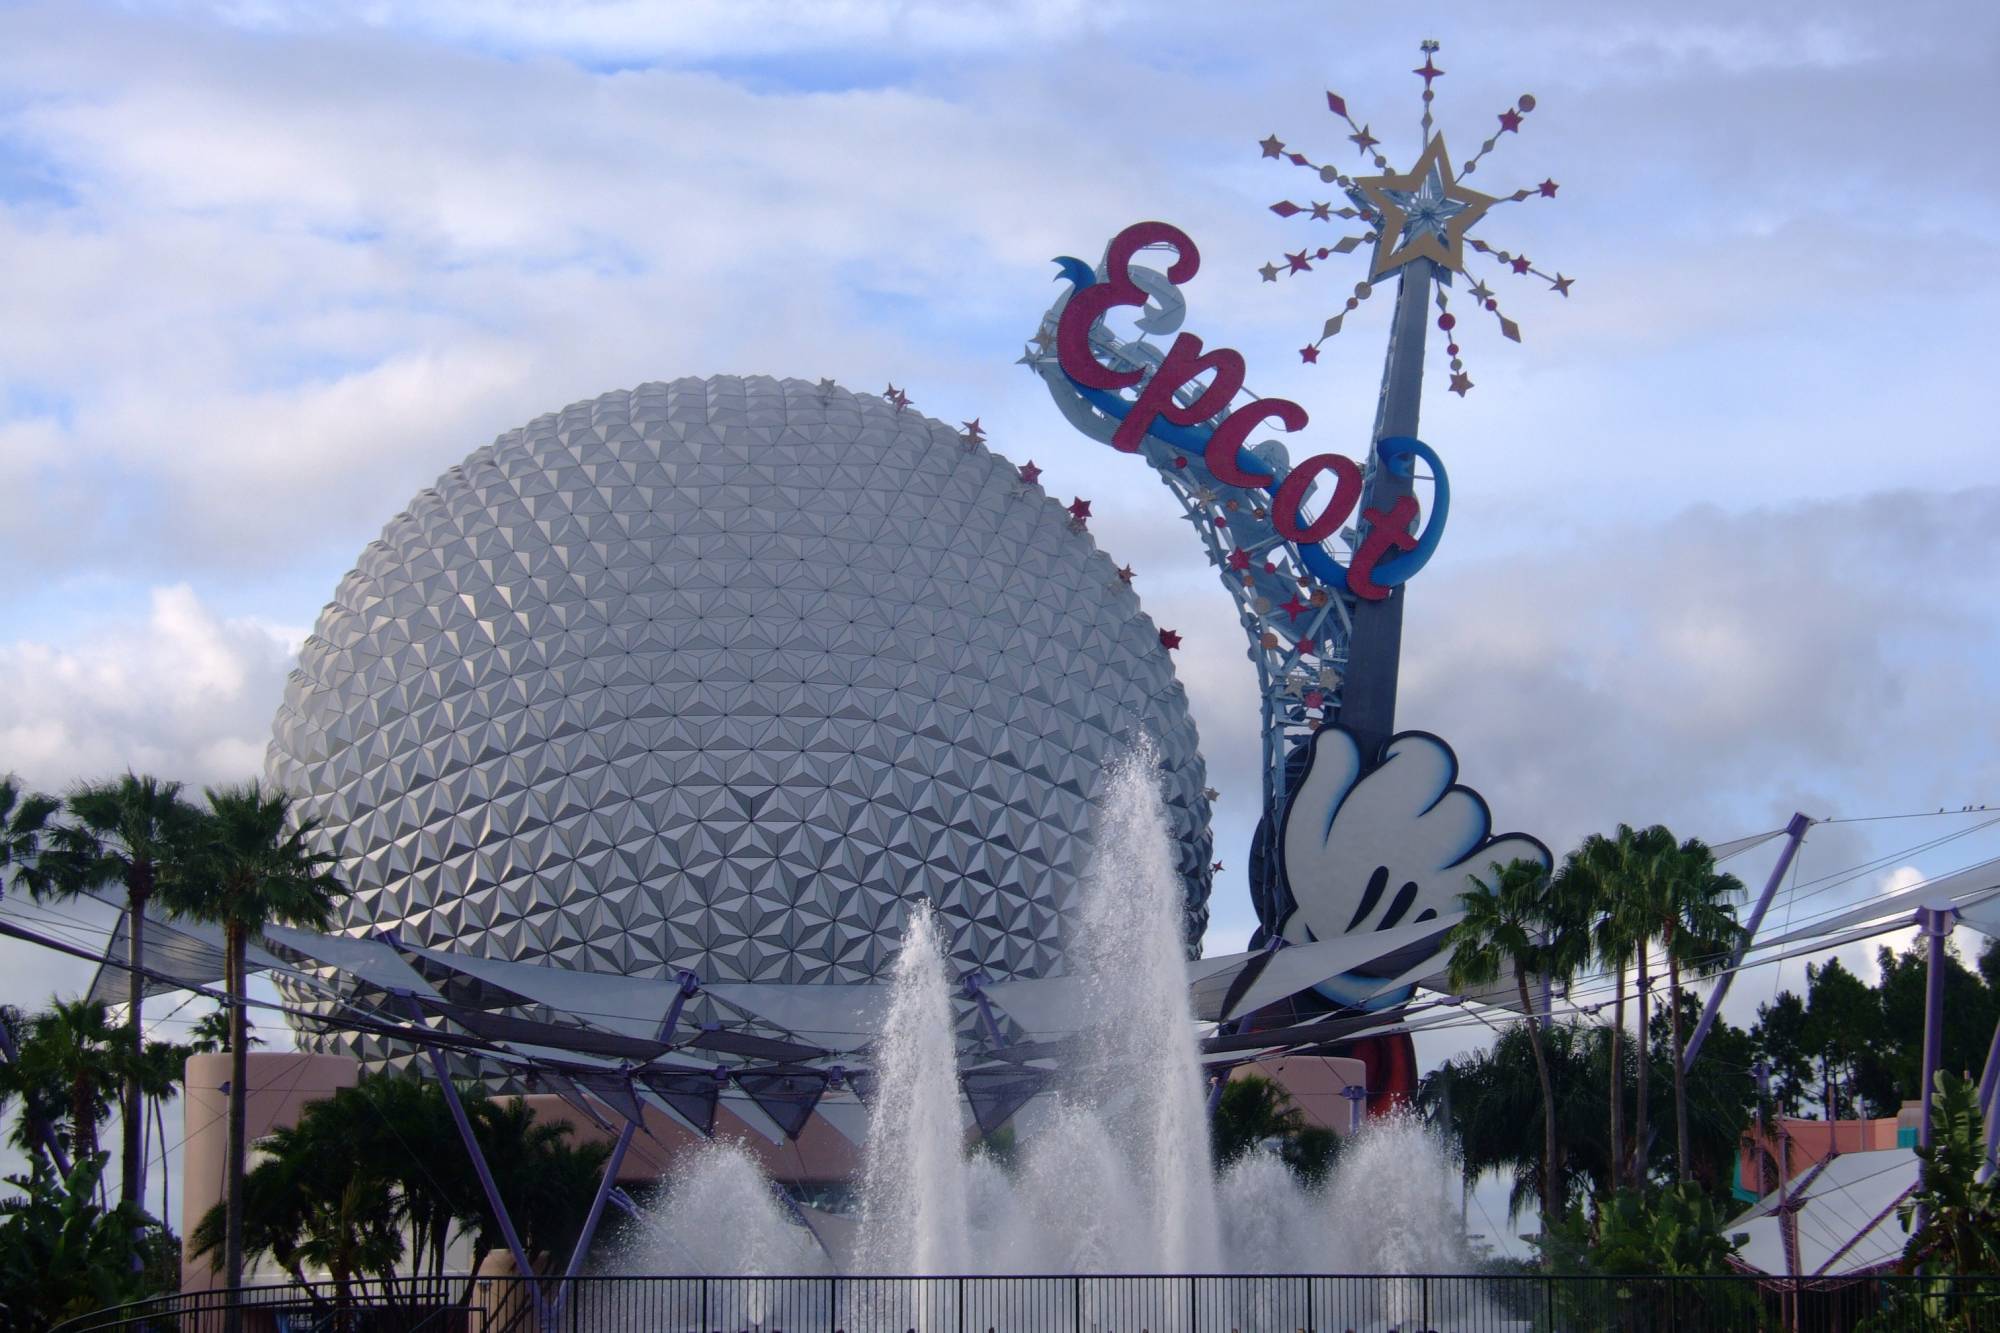 Epcot's Old Look!